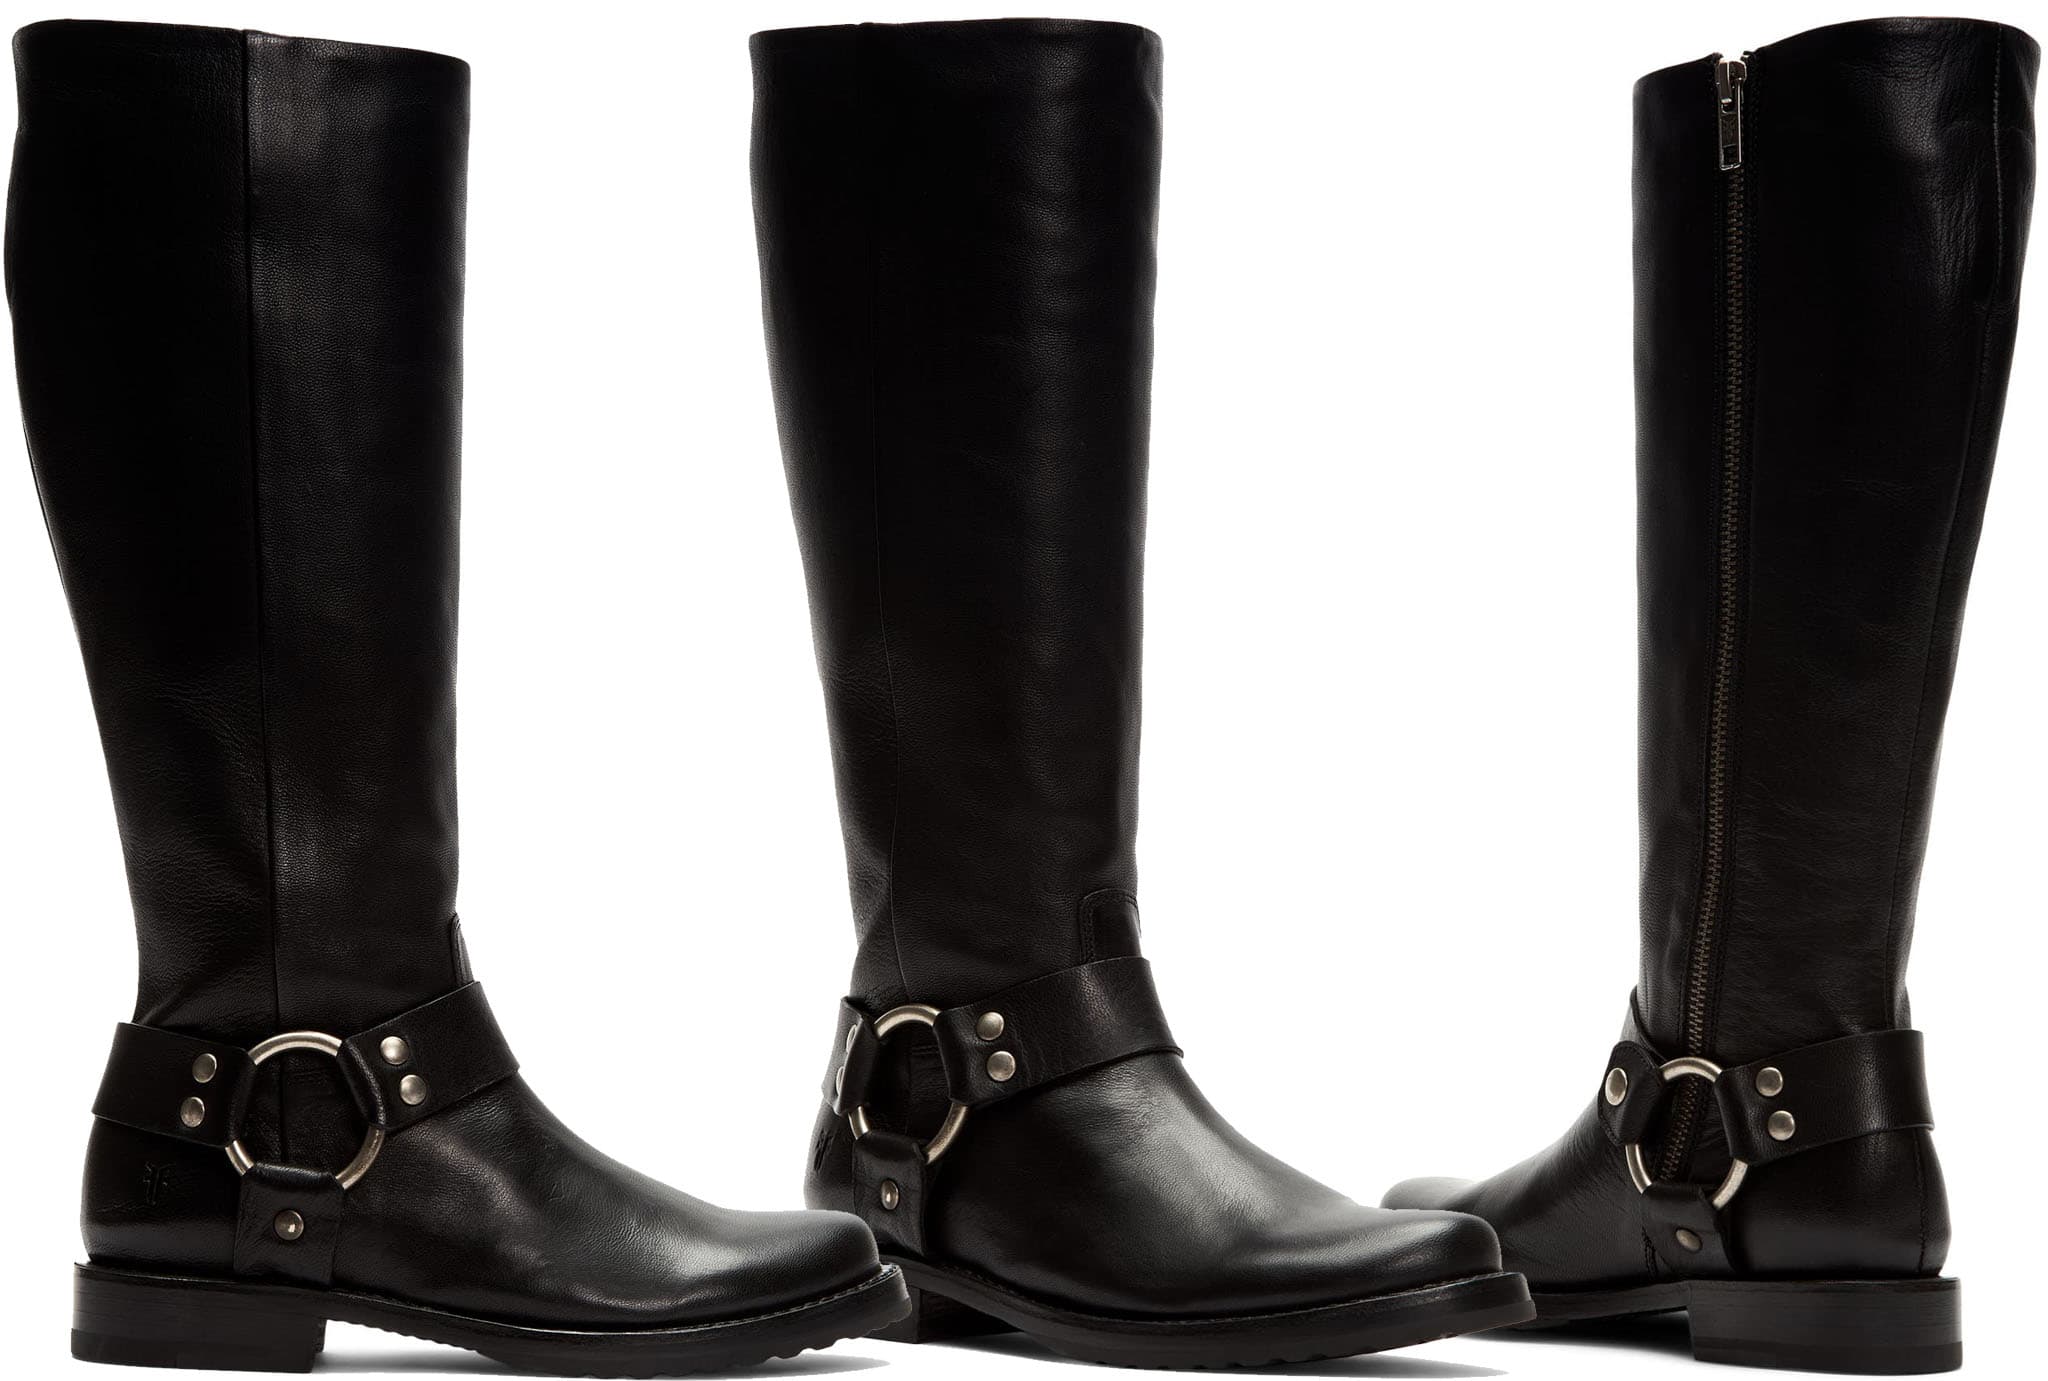 The classic O-ring and harness detail give a timeless appeal to the Veronica knee-high boots built with short chunky heels and rubber lug outsoles